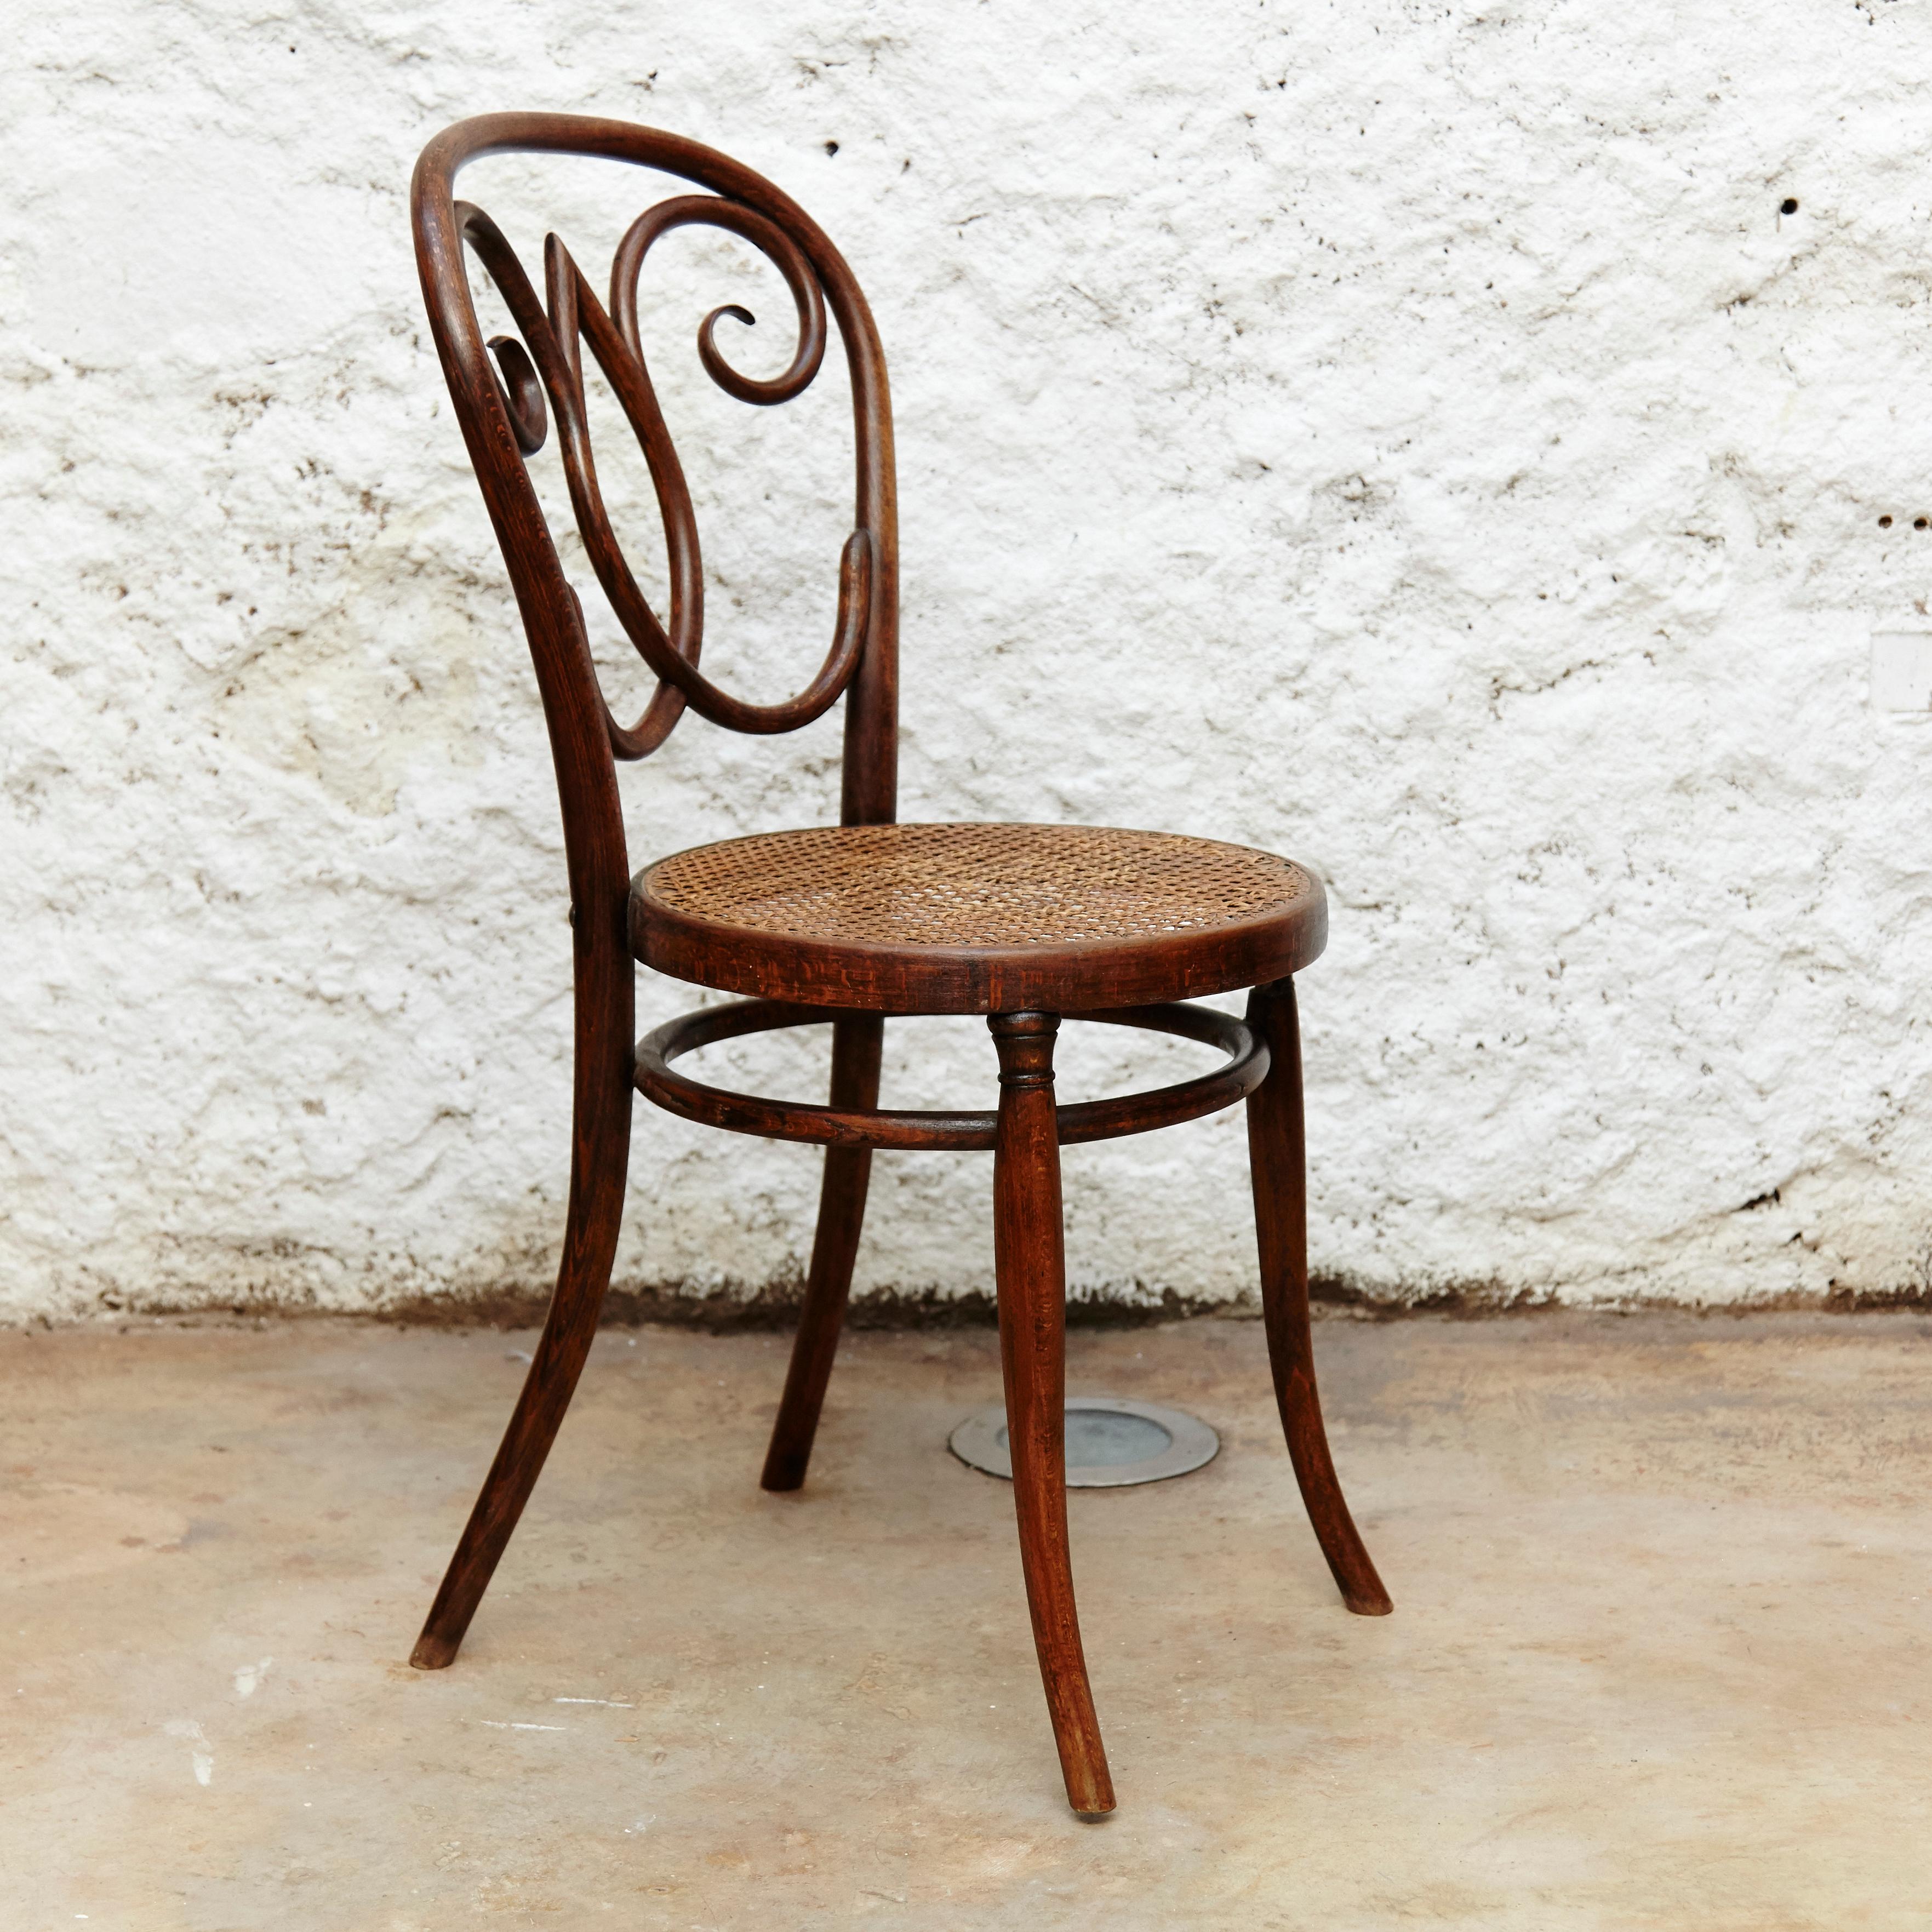 Bentwood and rattan chair by unknown designer and manufacturer.
Made in Austria, circa 1920.
With a beautiful wood backrest design, all it in the style of Thonet.

In original condition with minor wear consistent with age and use, preserving a